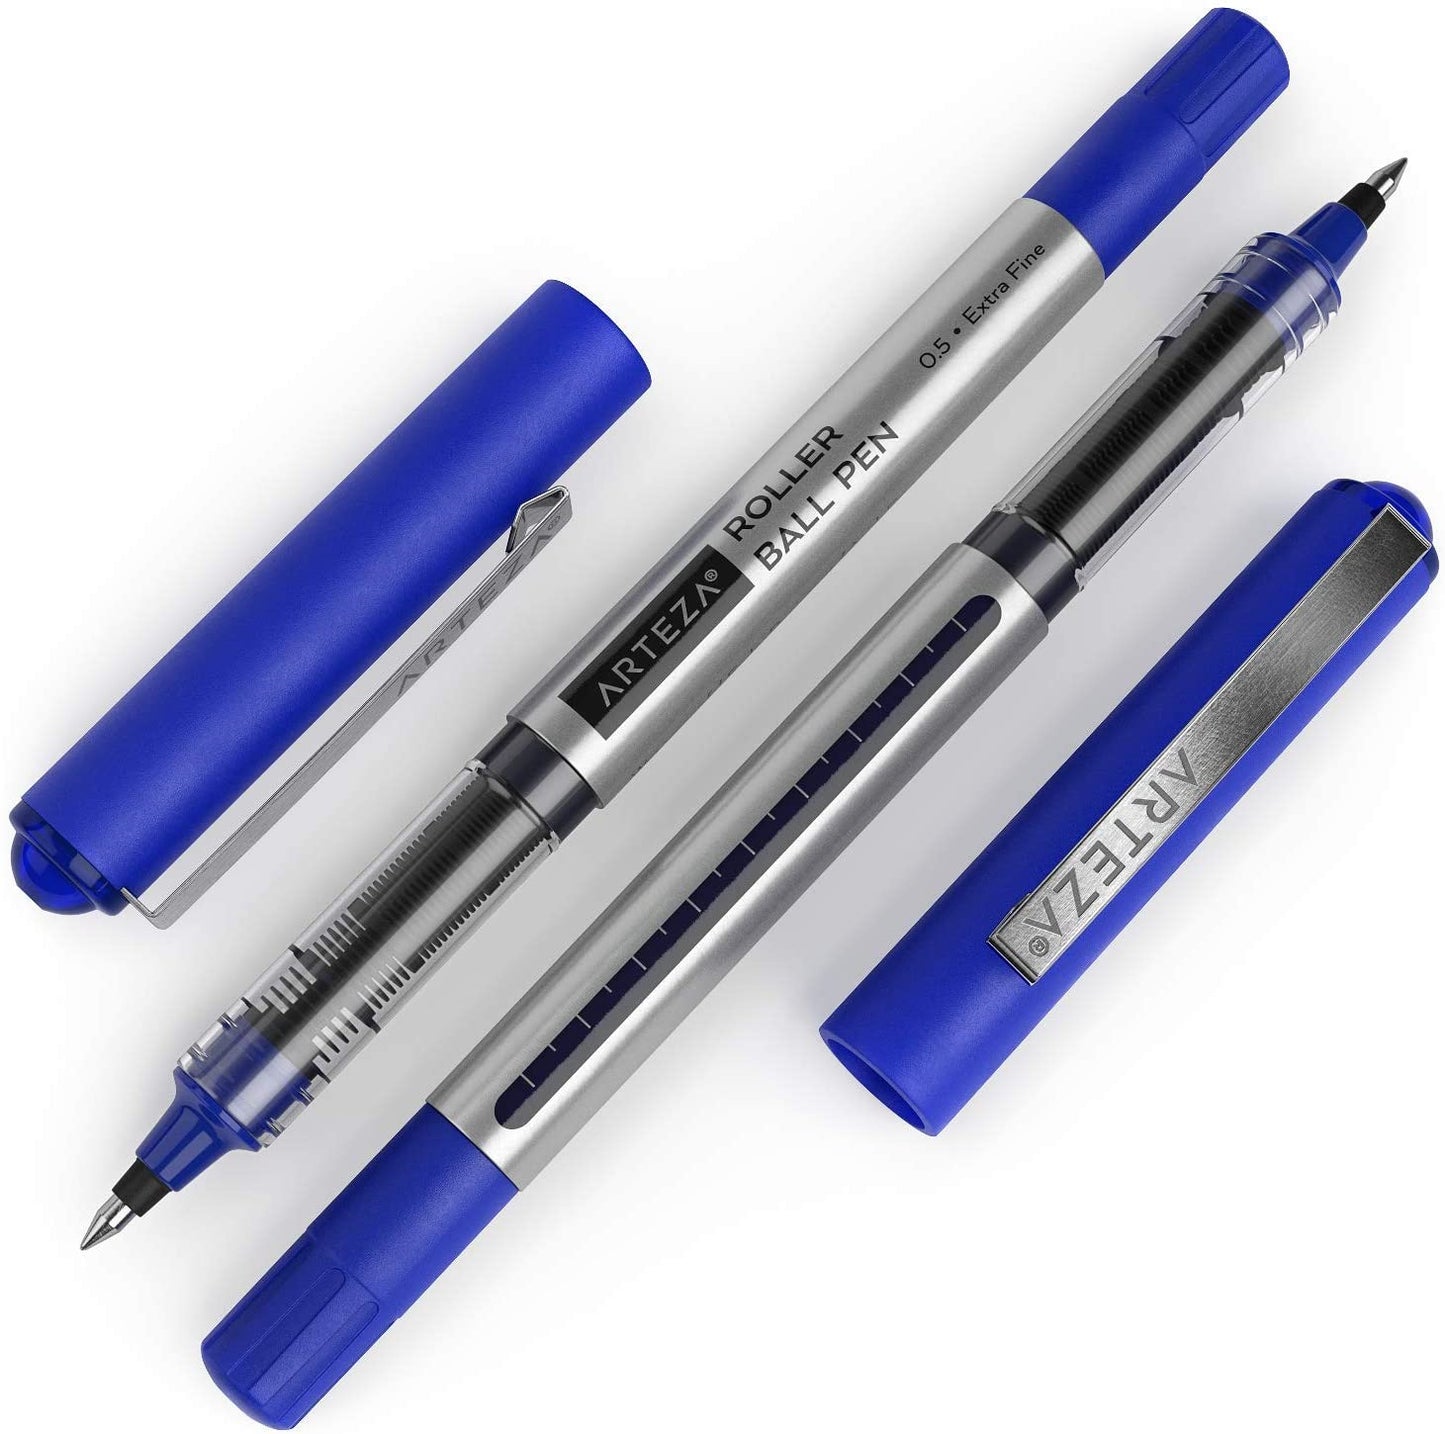 EBIZHIVE Blue Retractable Gel Pens Clicker Roller Ball Pen - Buy EBIZHIVE  Blue Retractable Gel Pens Clicker Roller Ball Pen - Roller Ball Pen Online  at Best Prices in India Only at